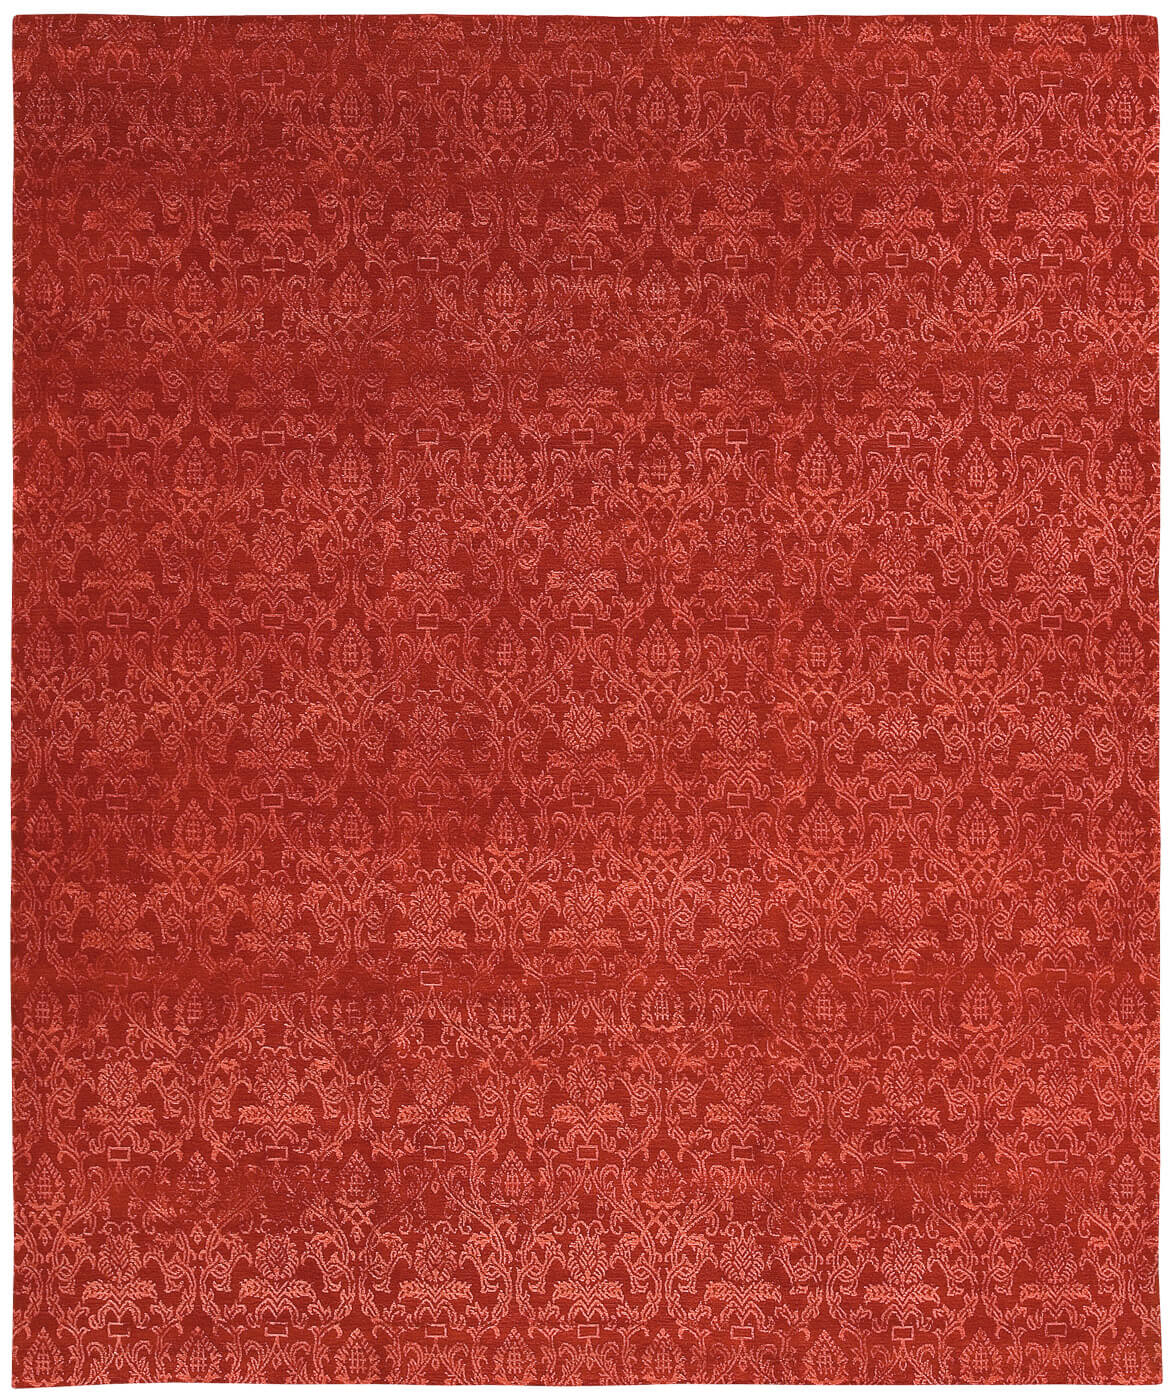 Roma Bright Red Luxury Hand-woven Rug ☞ Size: 250 x 300 cm